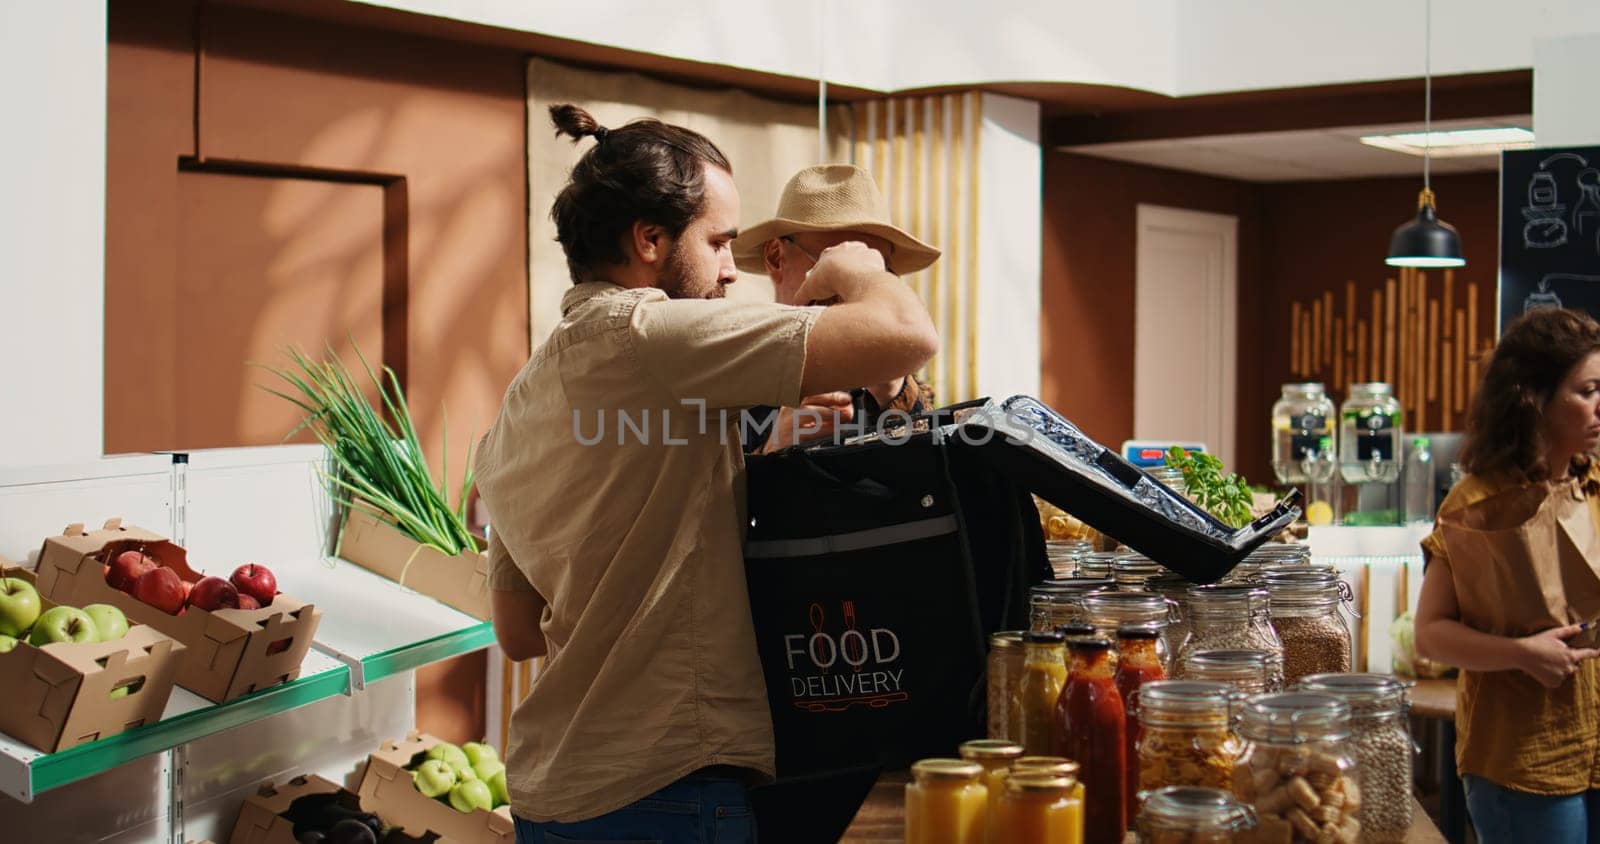 Deliveryman arriving in sustainable supermarket to pick up organic food order for client. Man delivering farm grown fruits from local neighborhood shop, receiving groceries from senior storekeeper